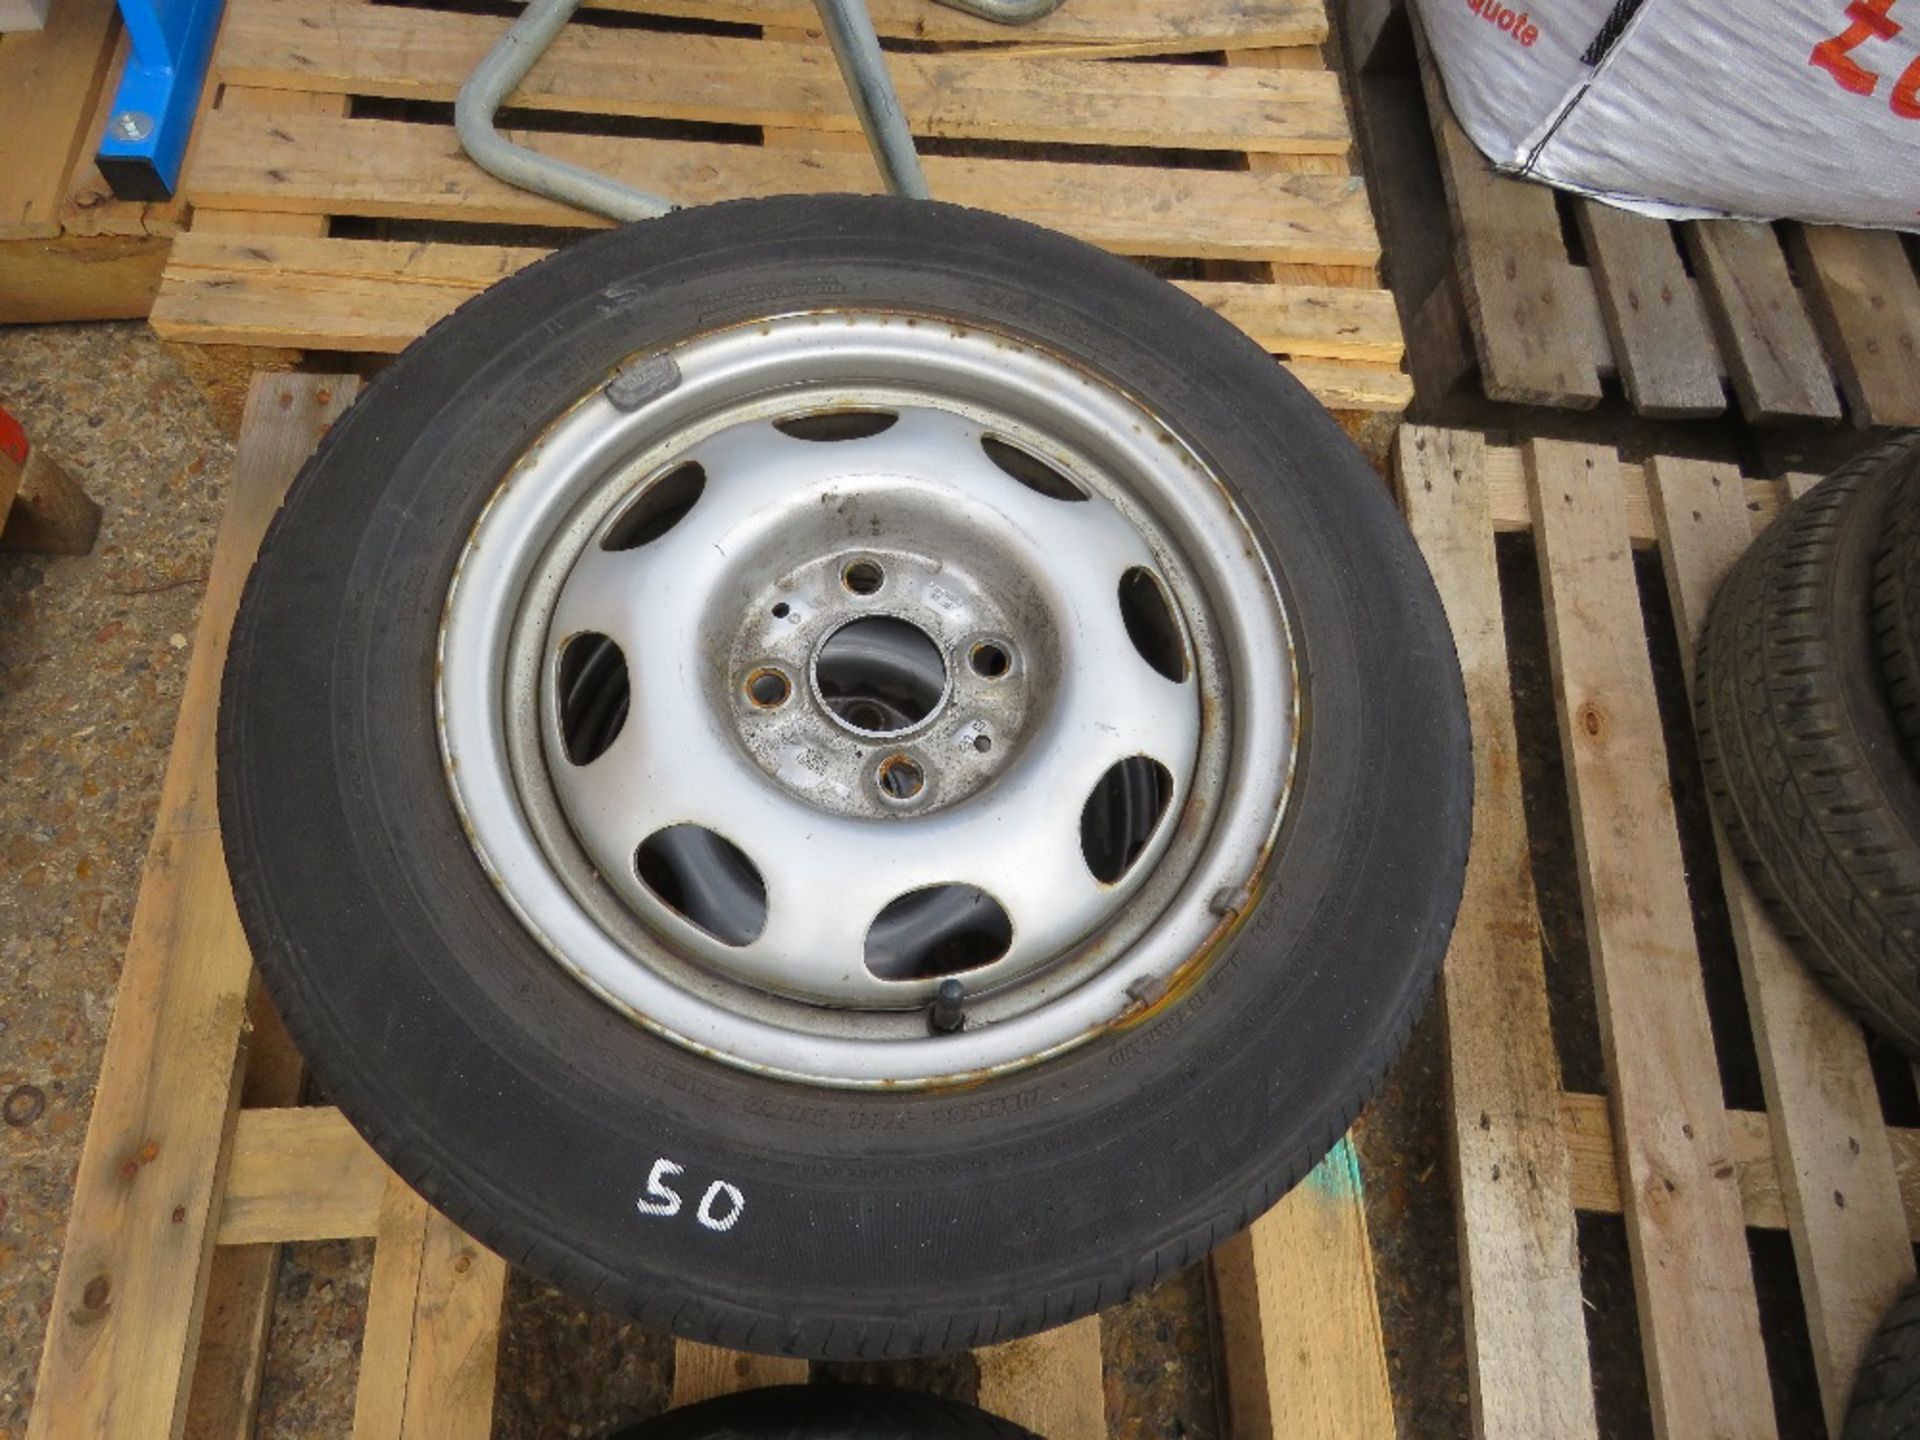 3 X WHEELS AND TYRES 175/65R13 SIZE. - Image 2 of 3